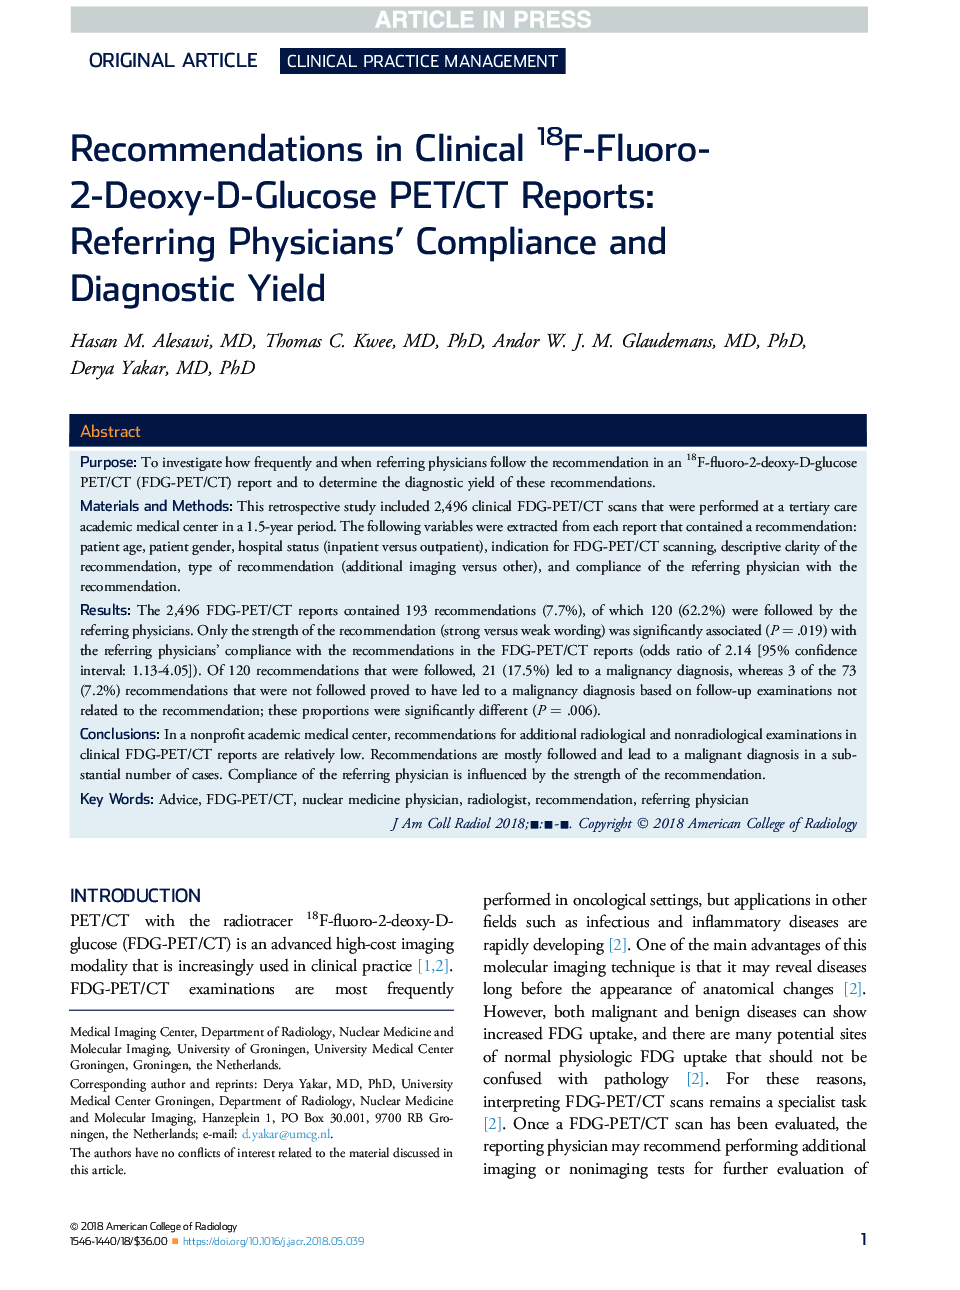 Recommendations in Clinical 18F-Fluoro-2-Deoxy-D-Glucose PET/CT Reports: Referring Physicians' Compliance and Diagnostic Yield